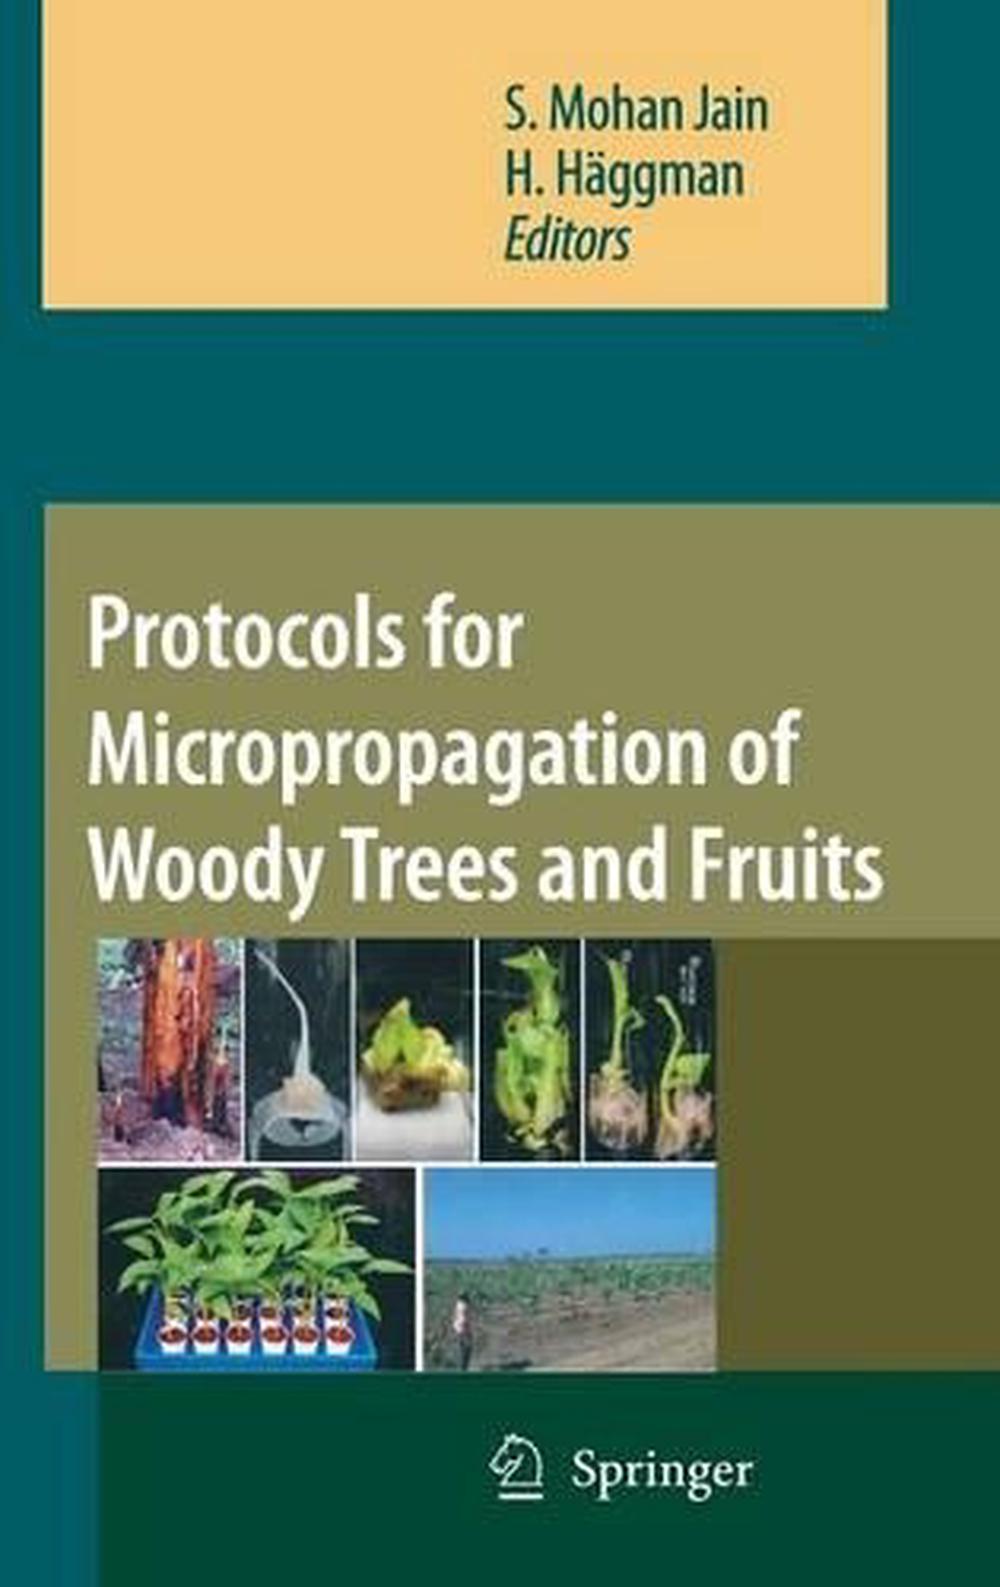 Protocols for Micropropagation of Woody Trees and Fruits (English) Hardcover Boo eBay